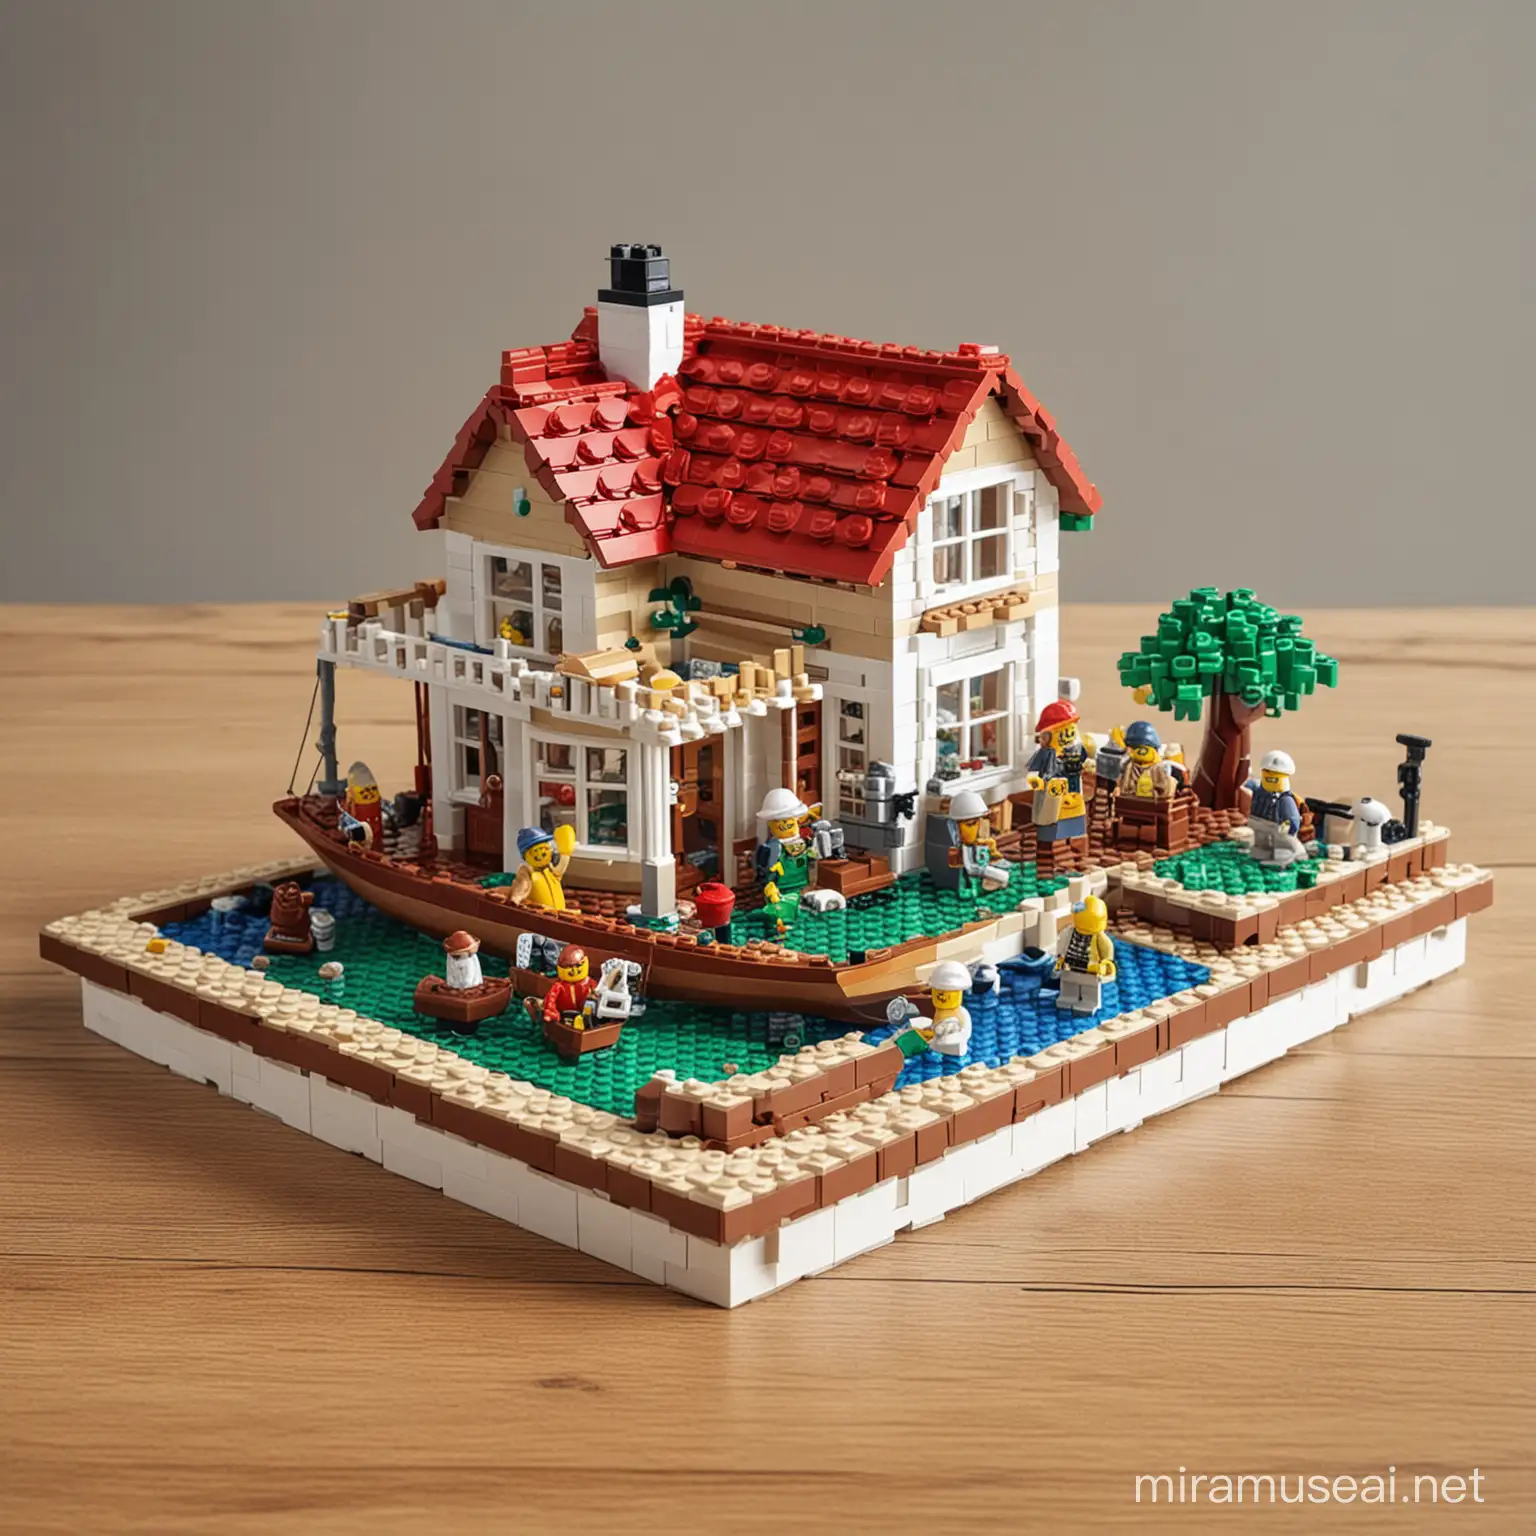 Lego Cottage and Boat on a Table with Miniature Characters